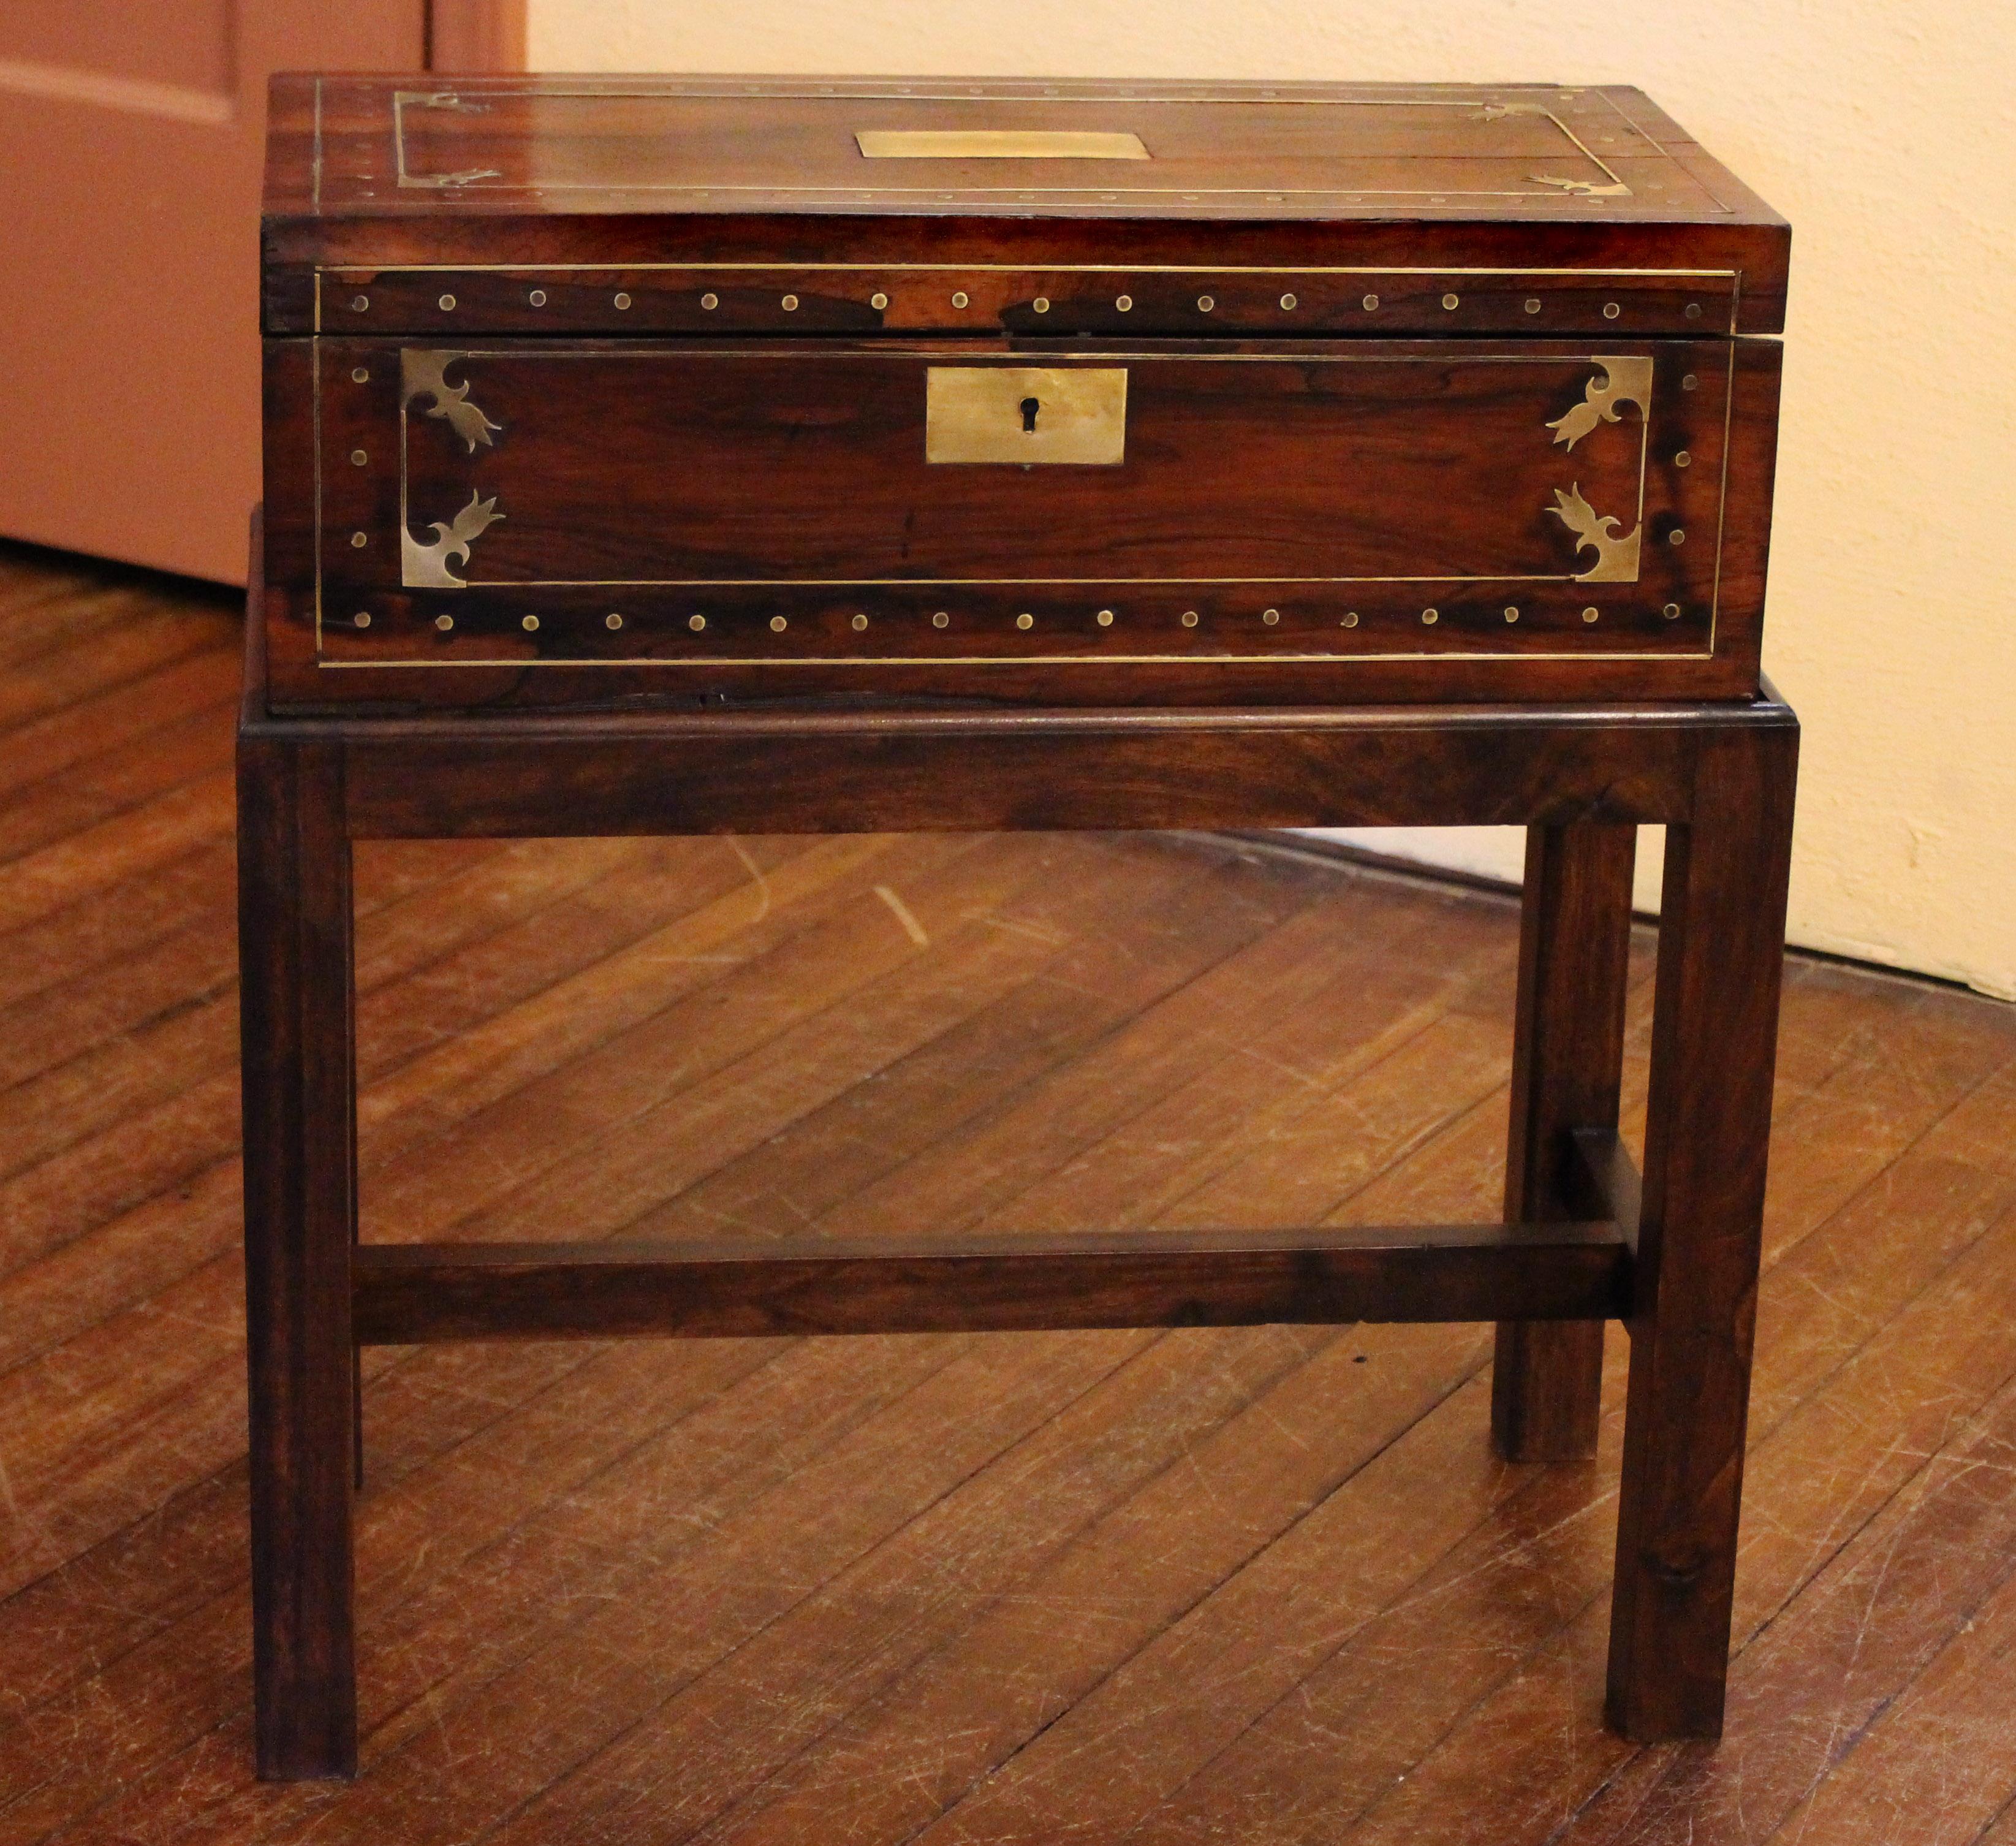 Early 19th century Regency lap desk now on custom made stand as a side table. English. Rosewood with extensive bold brass inlays. Various, though unobtrusive veneer losses commensurate with age & use. The interior surface re-baized. Secret interior